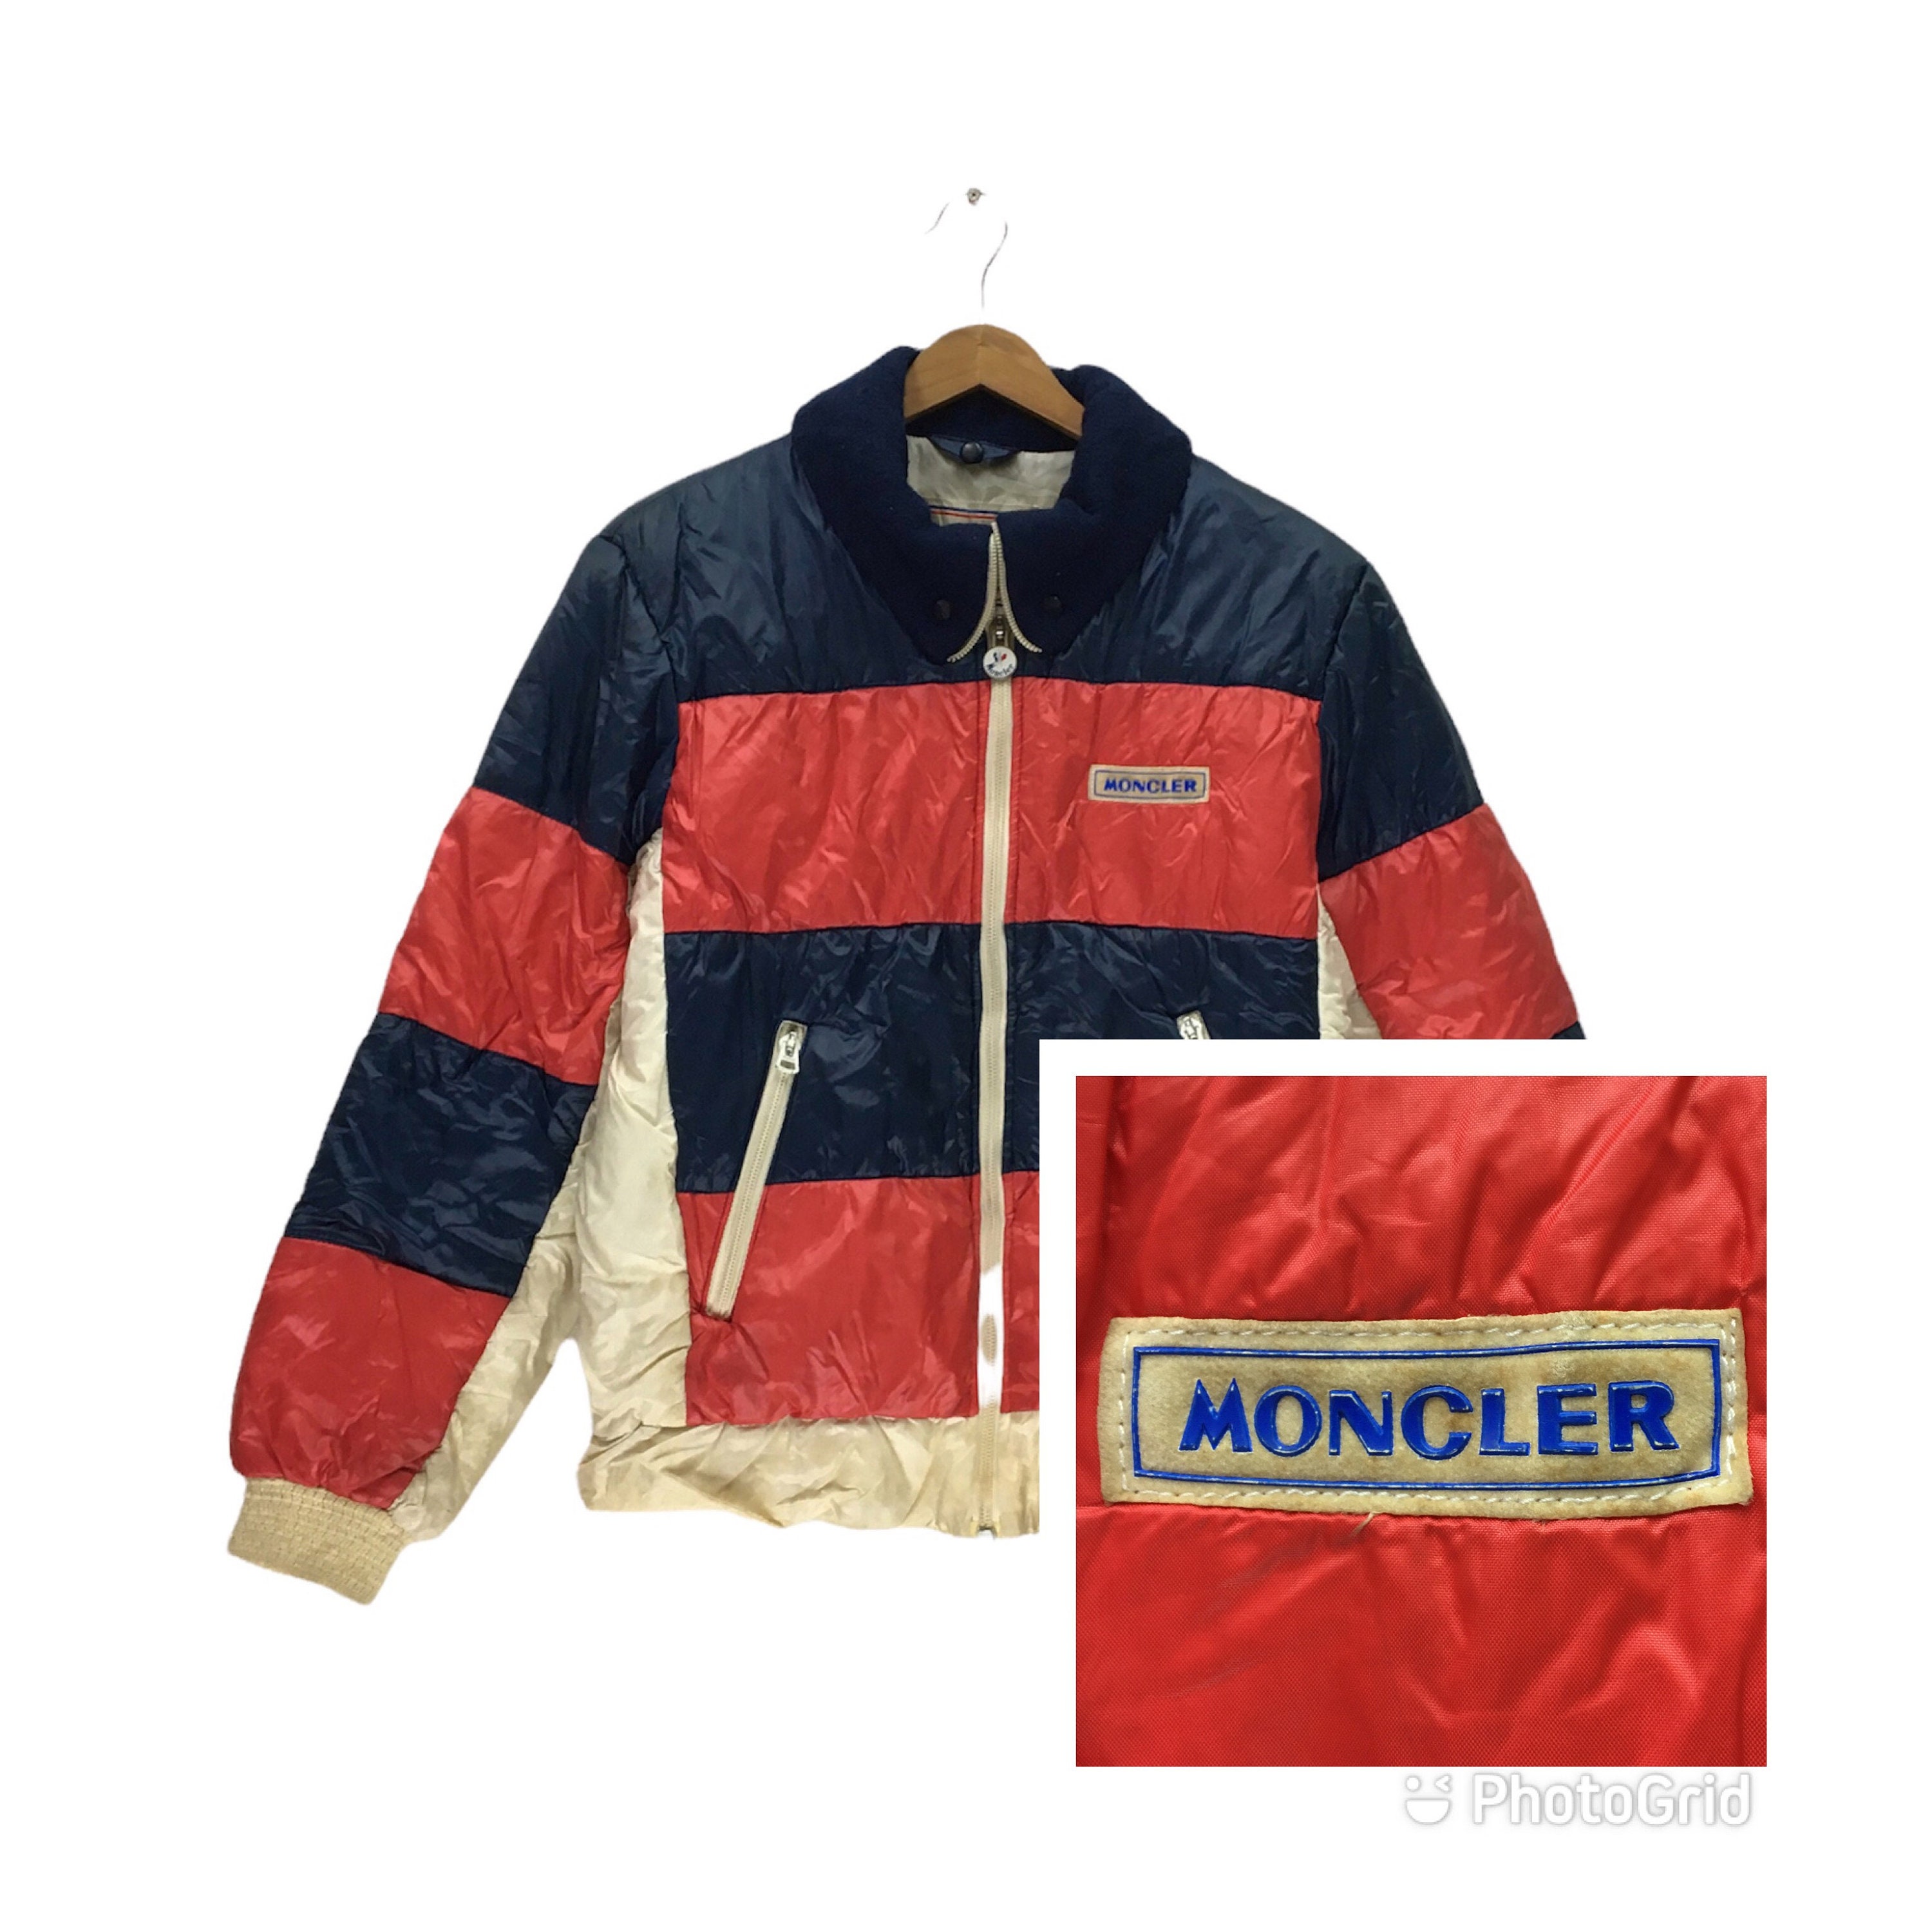 Moncler Italy - Etsy